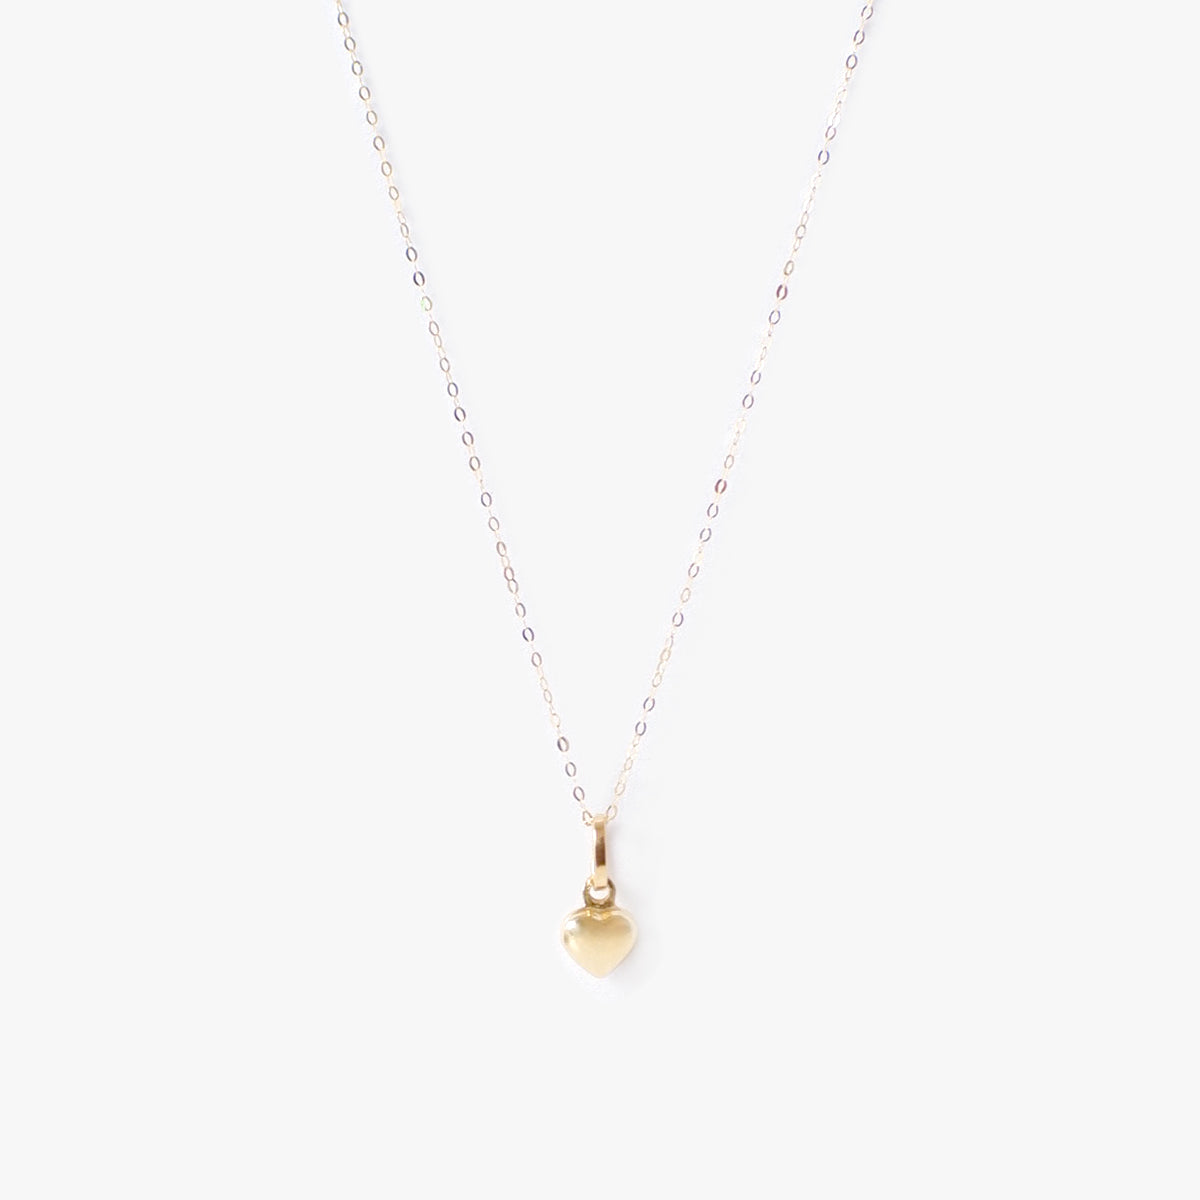 The Mini Heart Necklace in Solid Gold